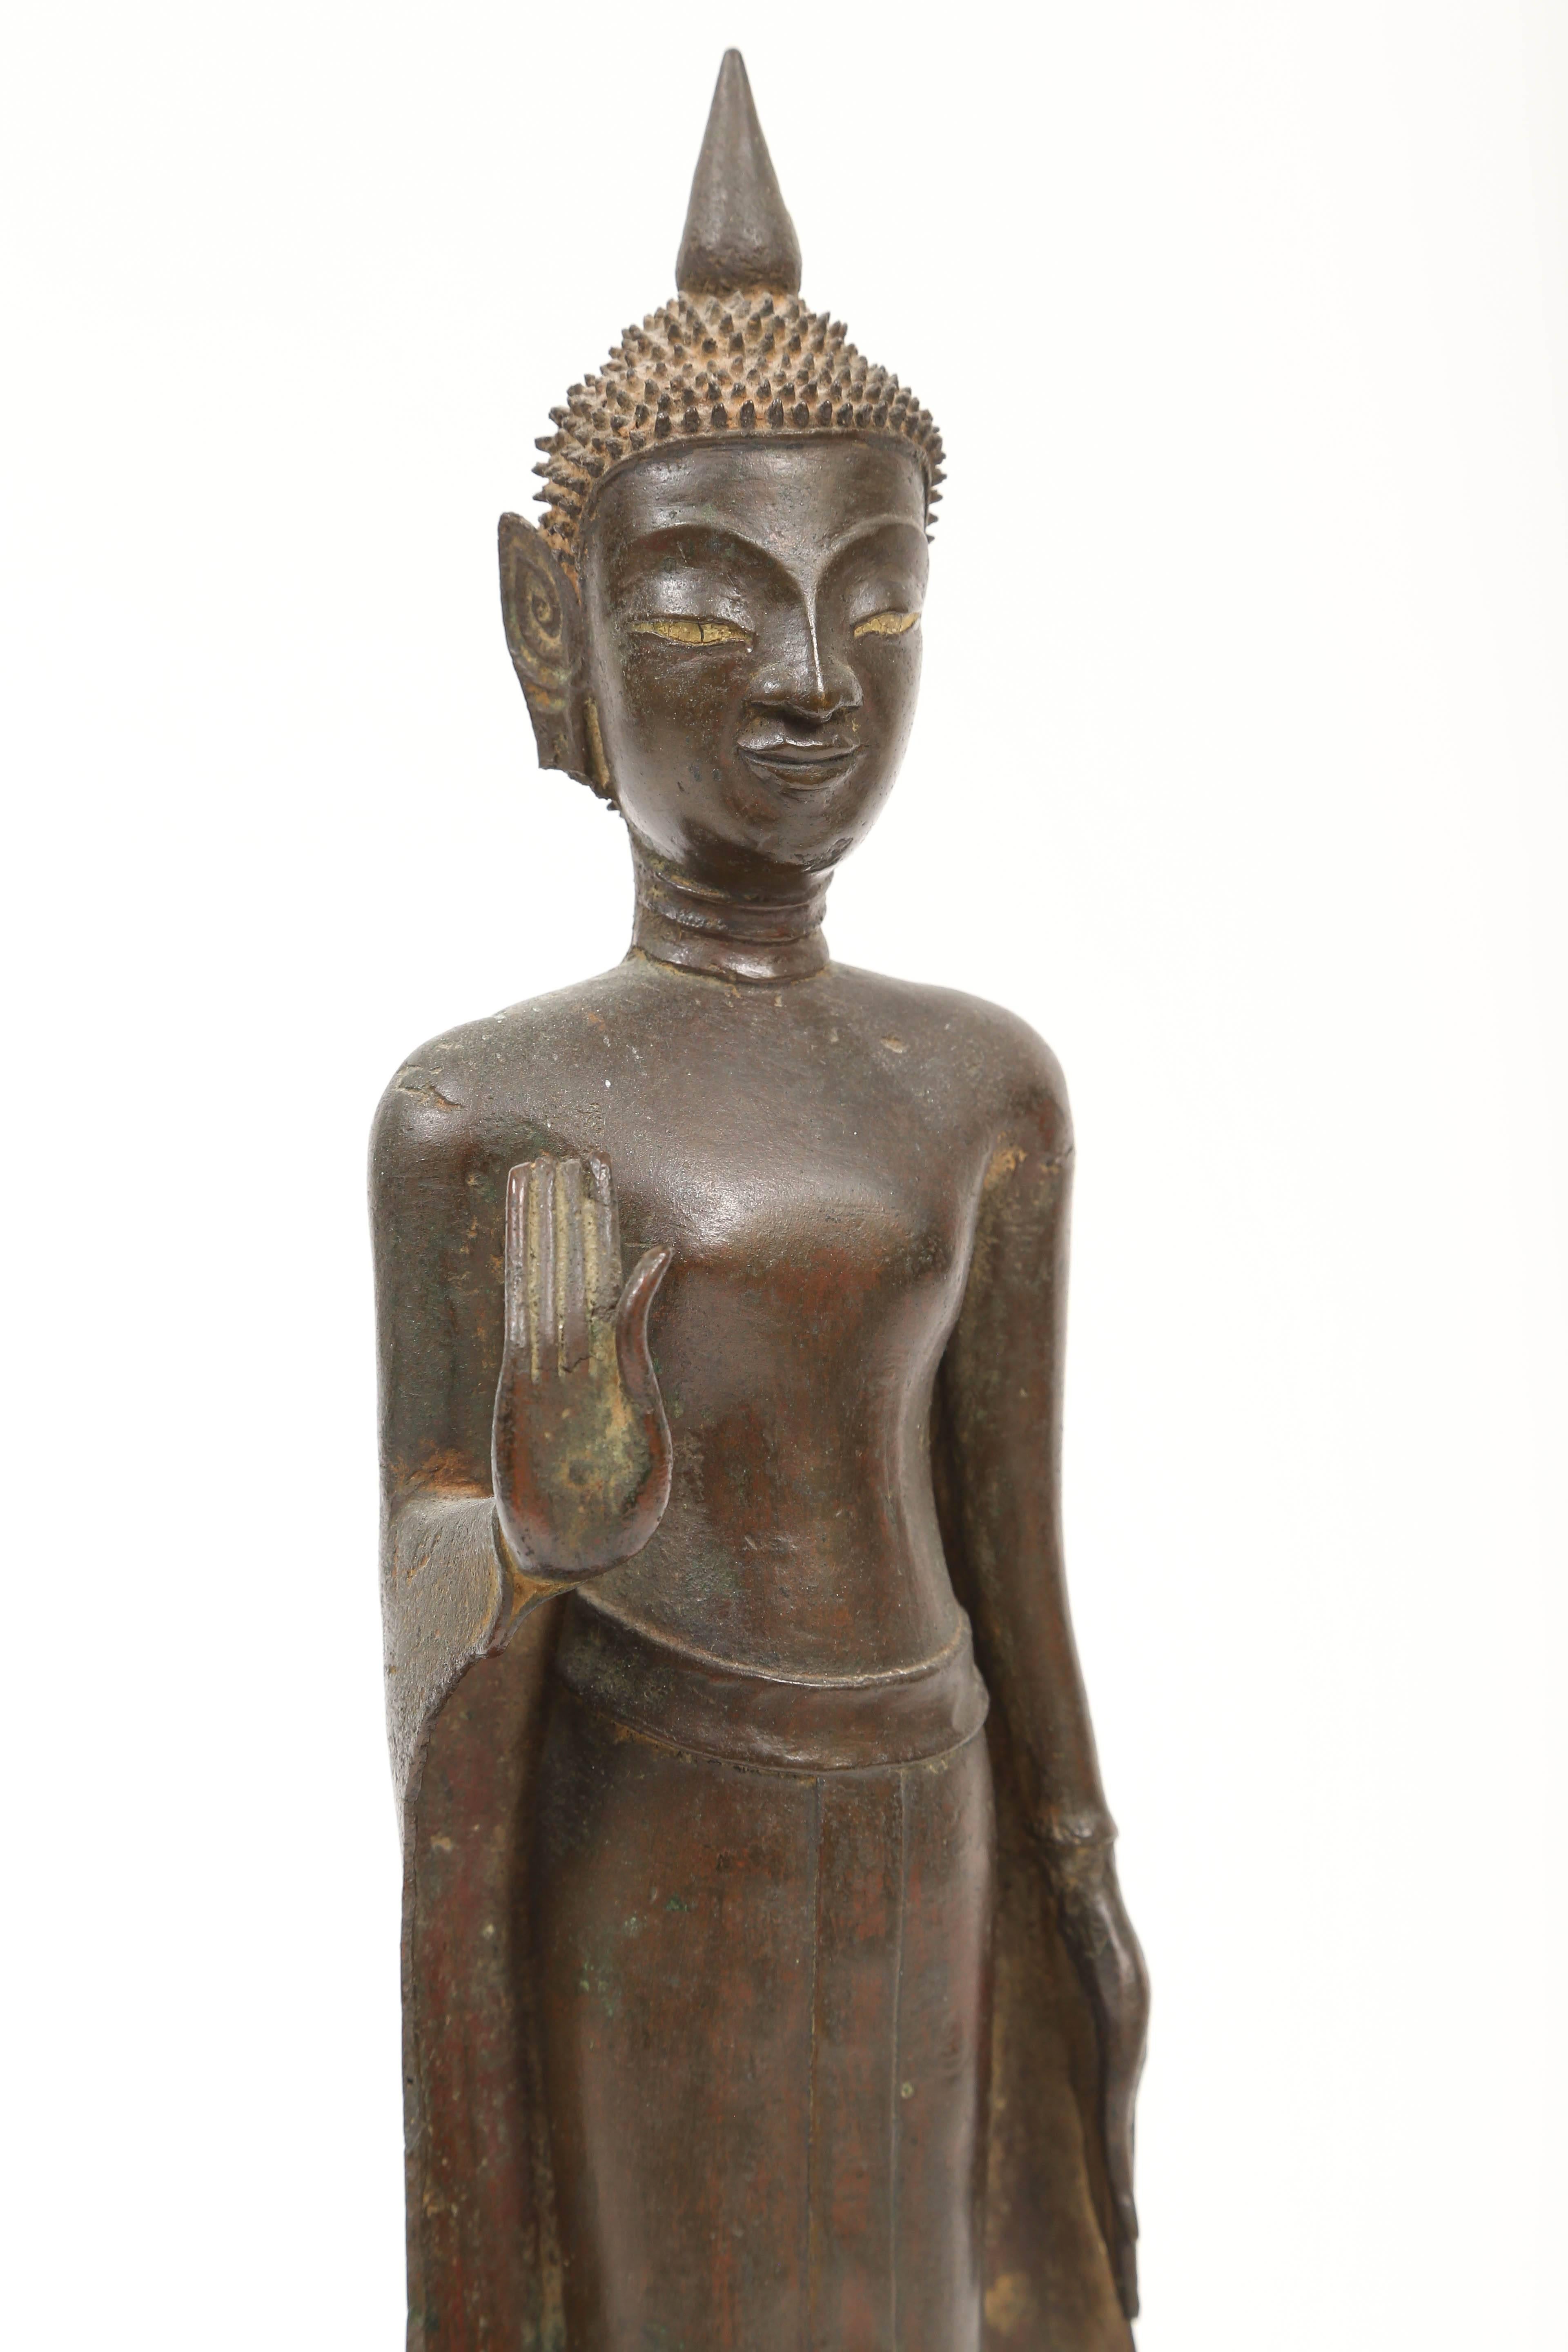 This bronze standing Buddha mounted on a turned wood base has his right palm held outward in the abhaya mudra position, a gesture of fearlessness and reassurance.